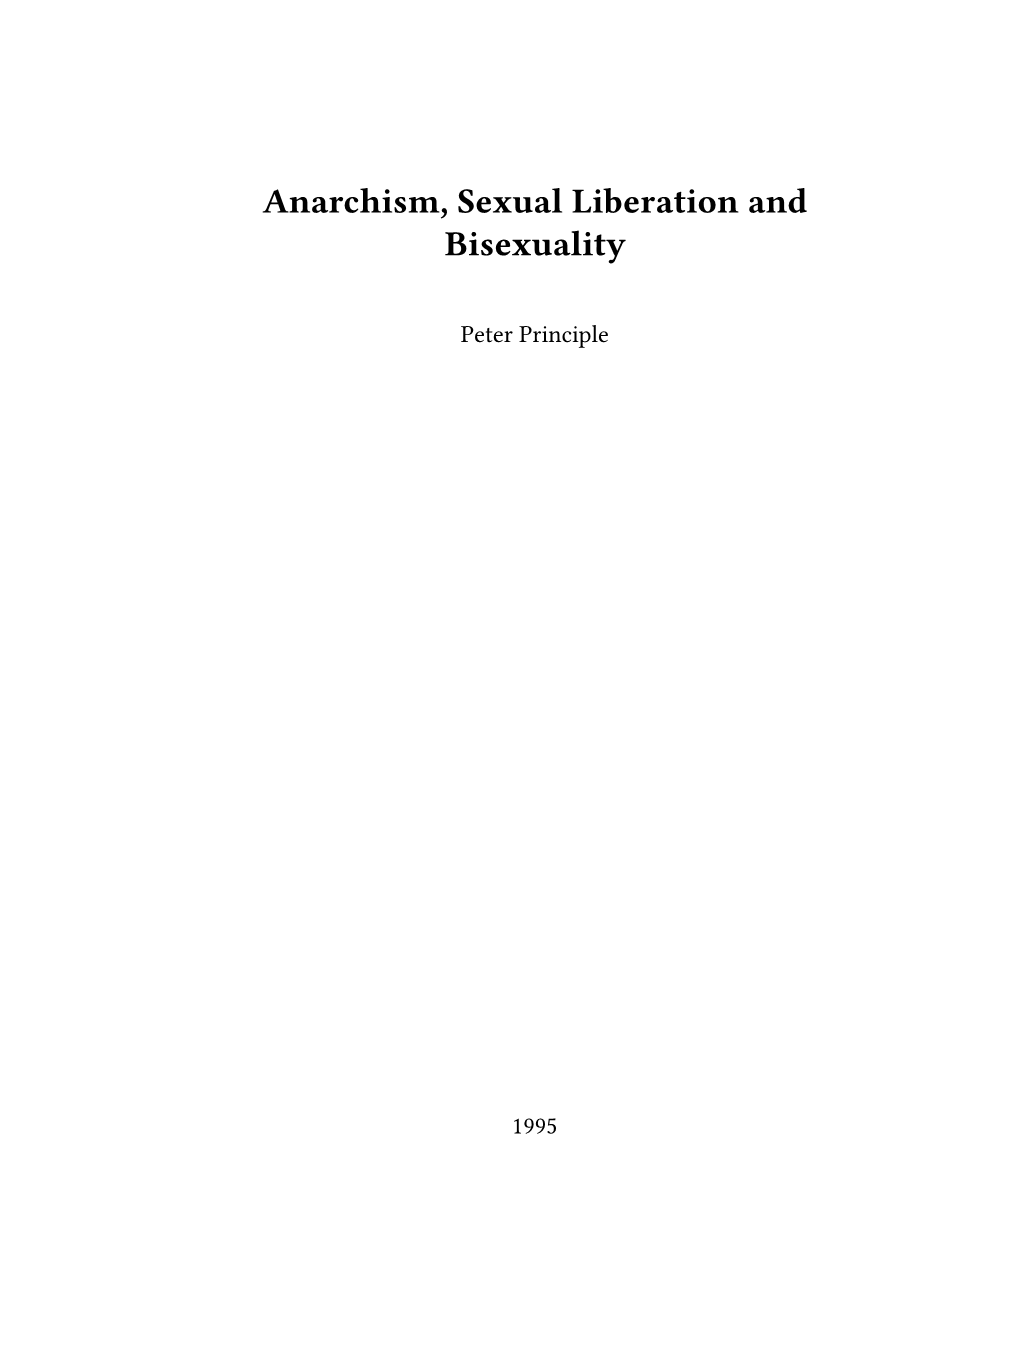 Anarchism, Sexual Liberation and Bisexuality